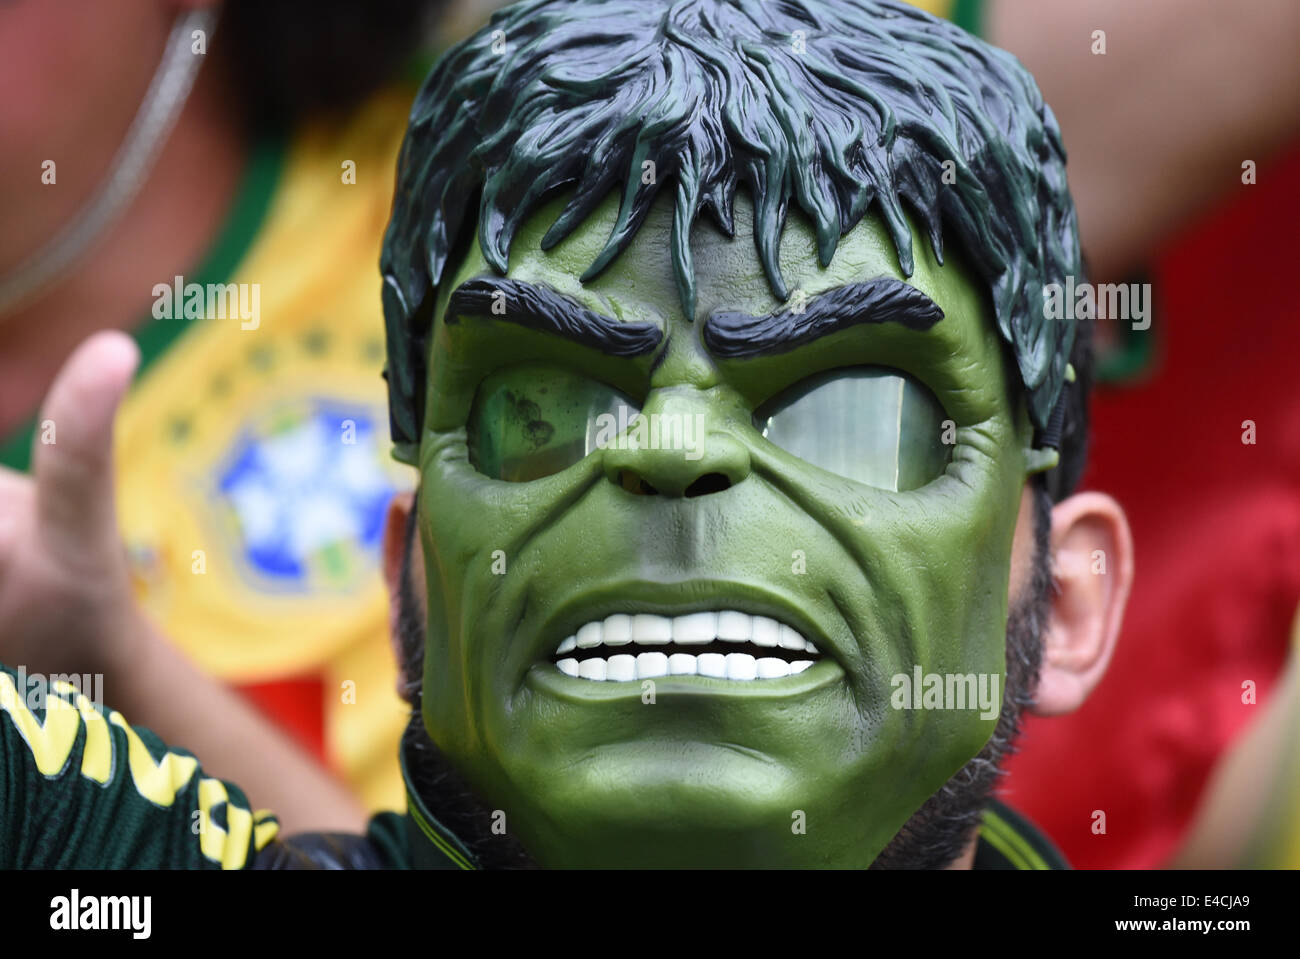 Belo Horizonte, Brazil. 08th July, 2014. A supporter of Brazil poses with face mask of Hulk prior to the FIFA World Cup 2014 semi-final soccer match between Brazil and Germany at Estadio Mineirao in Belo Horizonte, Brazil, 08 July 2014. Photo: Marcus Brandt/dpa/Alamy Live News Stock Photo